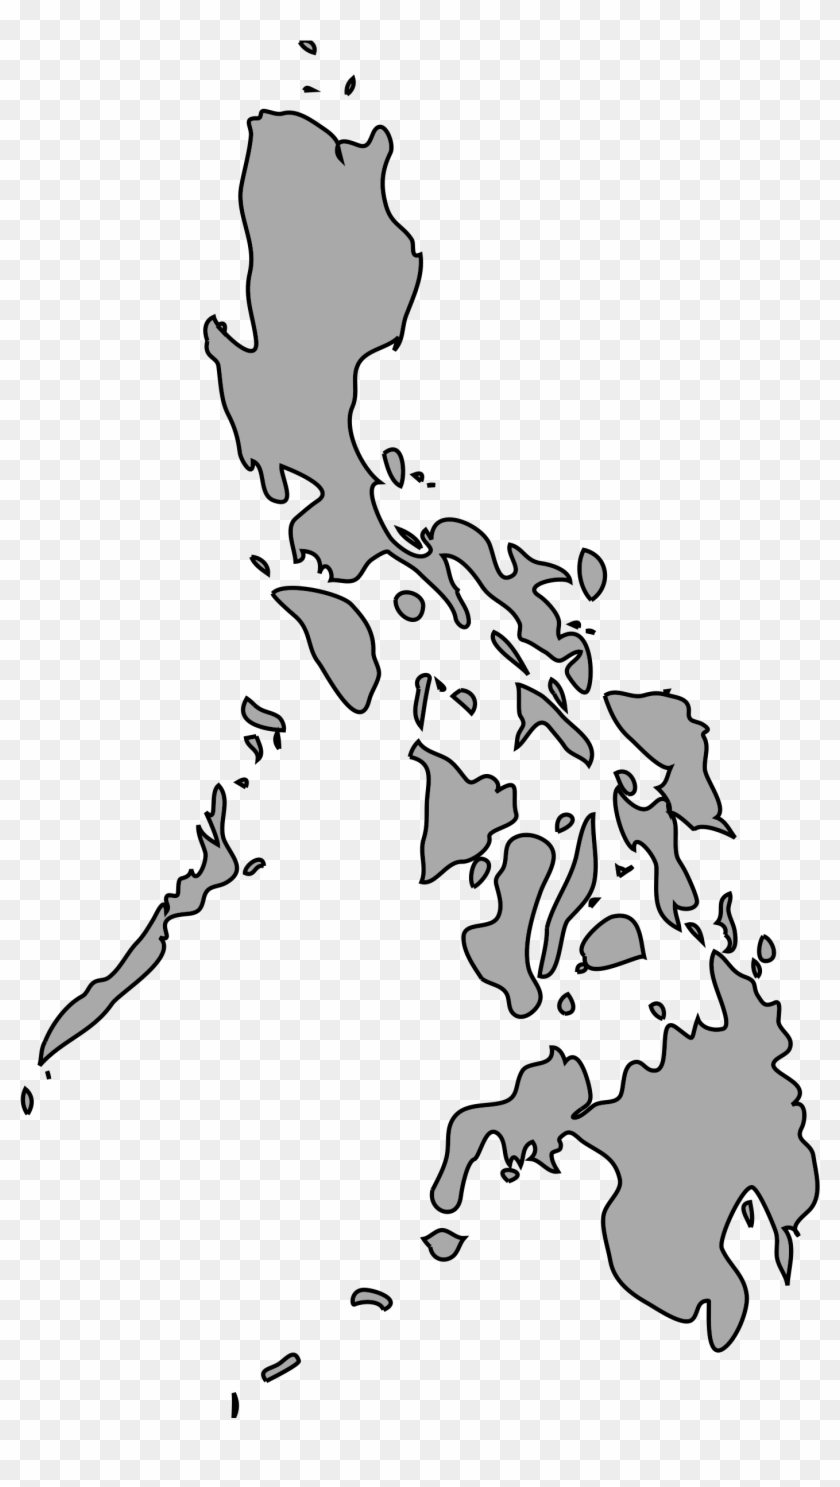 philippines islands island clipartfest philippine map vector png transparent png 545526 pikpng philippine map vector png transparent